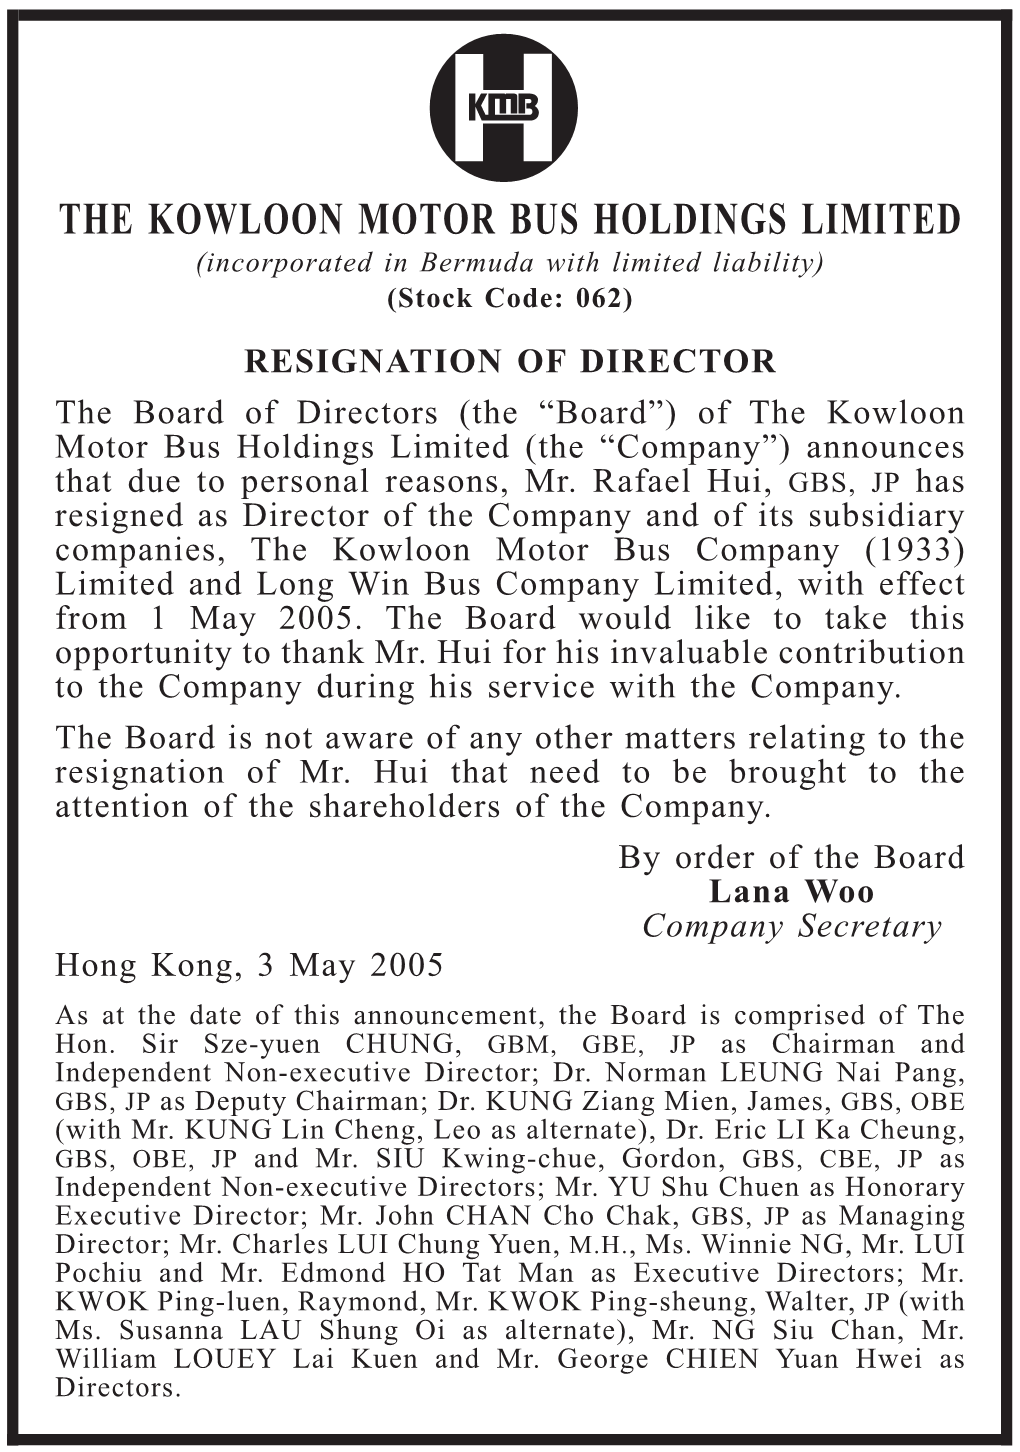 The Kowloon Motor Bus Holdings Limited